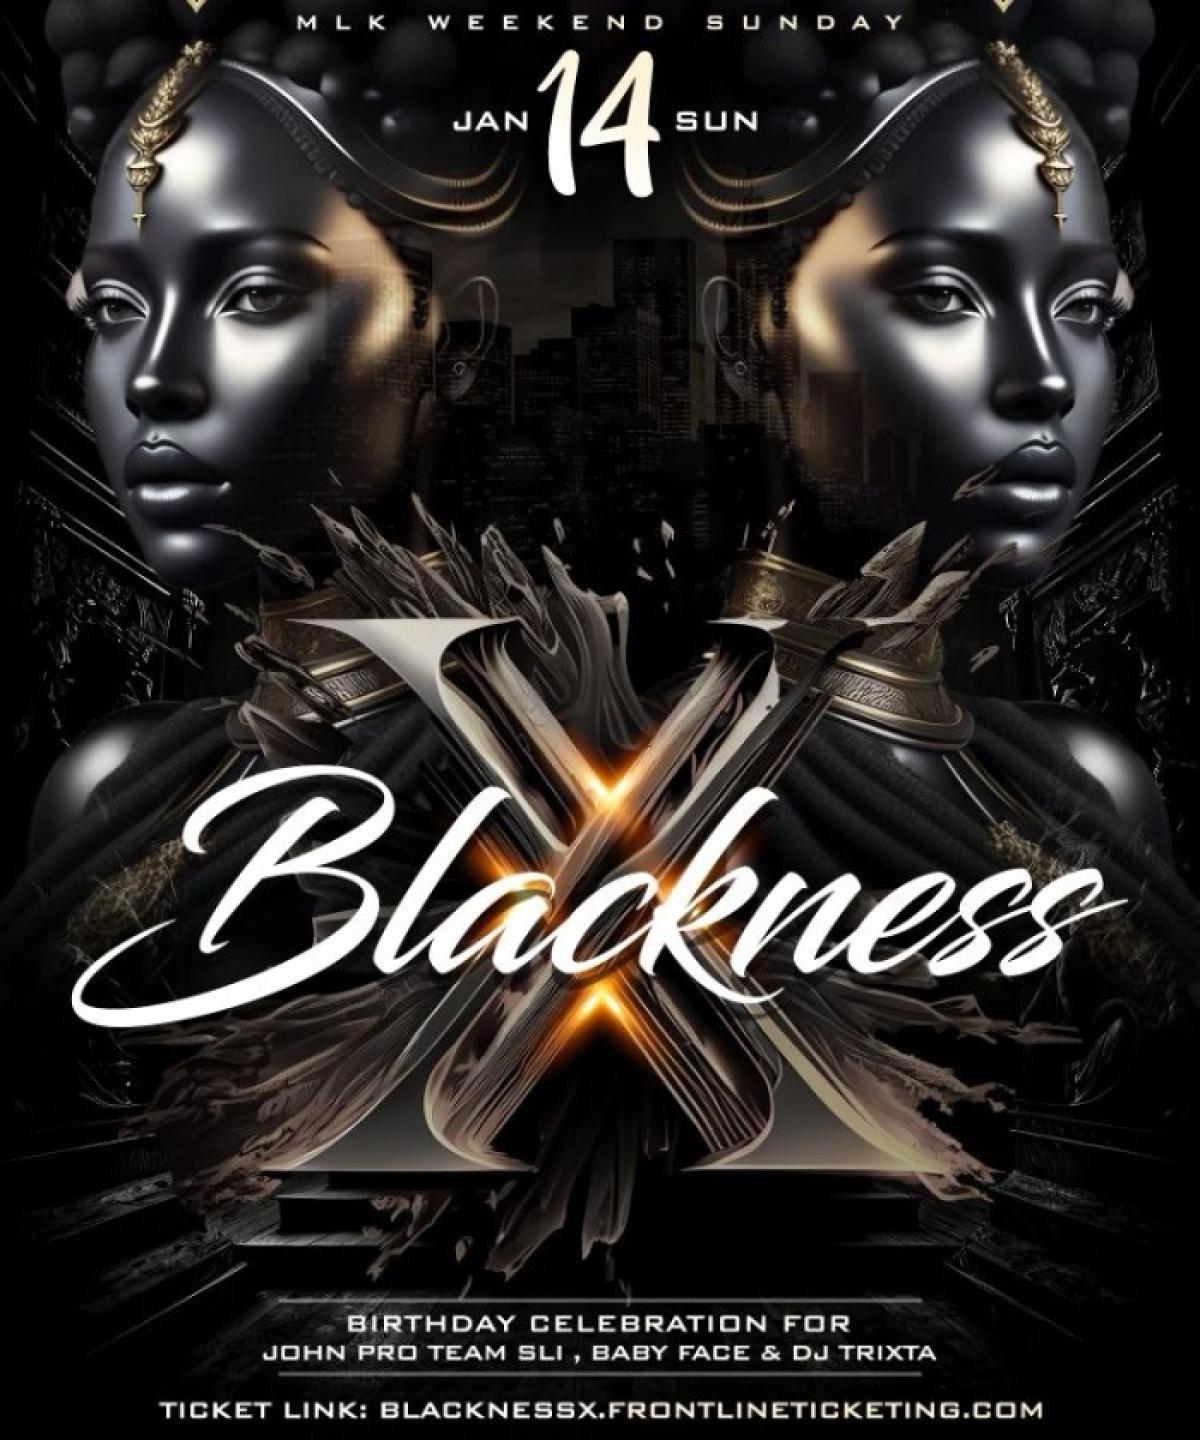 Blackness - X flyer or graphic.